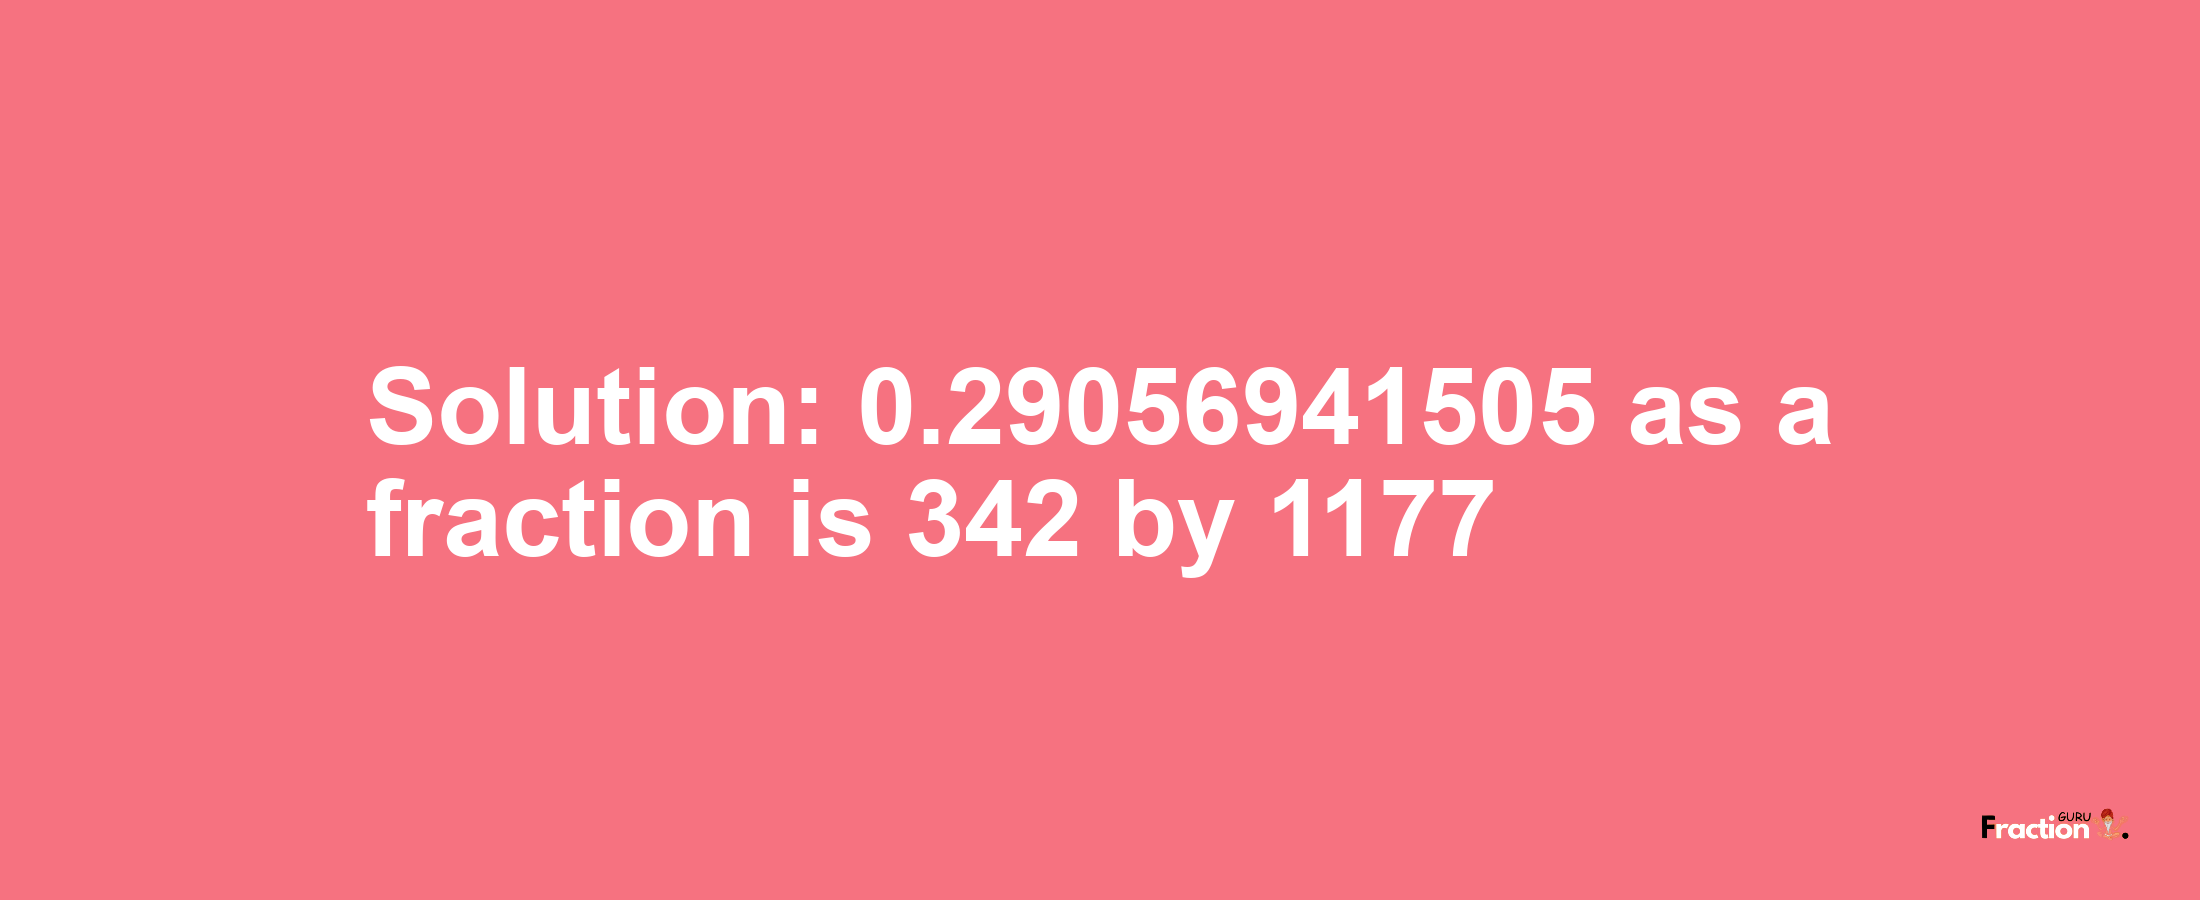 Solution:0.29056941505 as a fraction is 342/1177